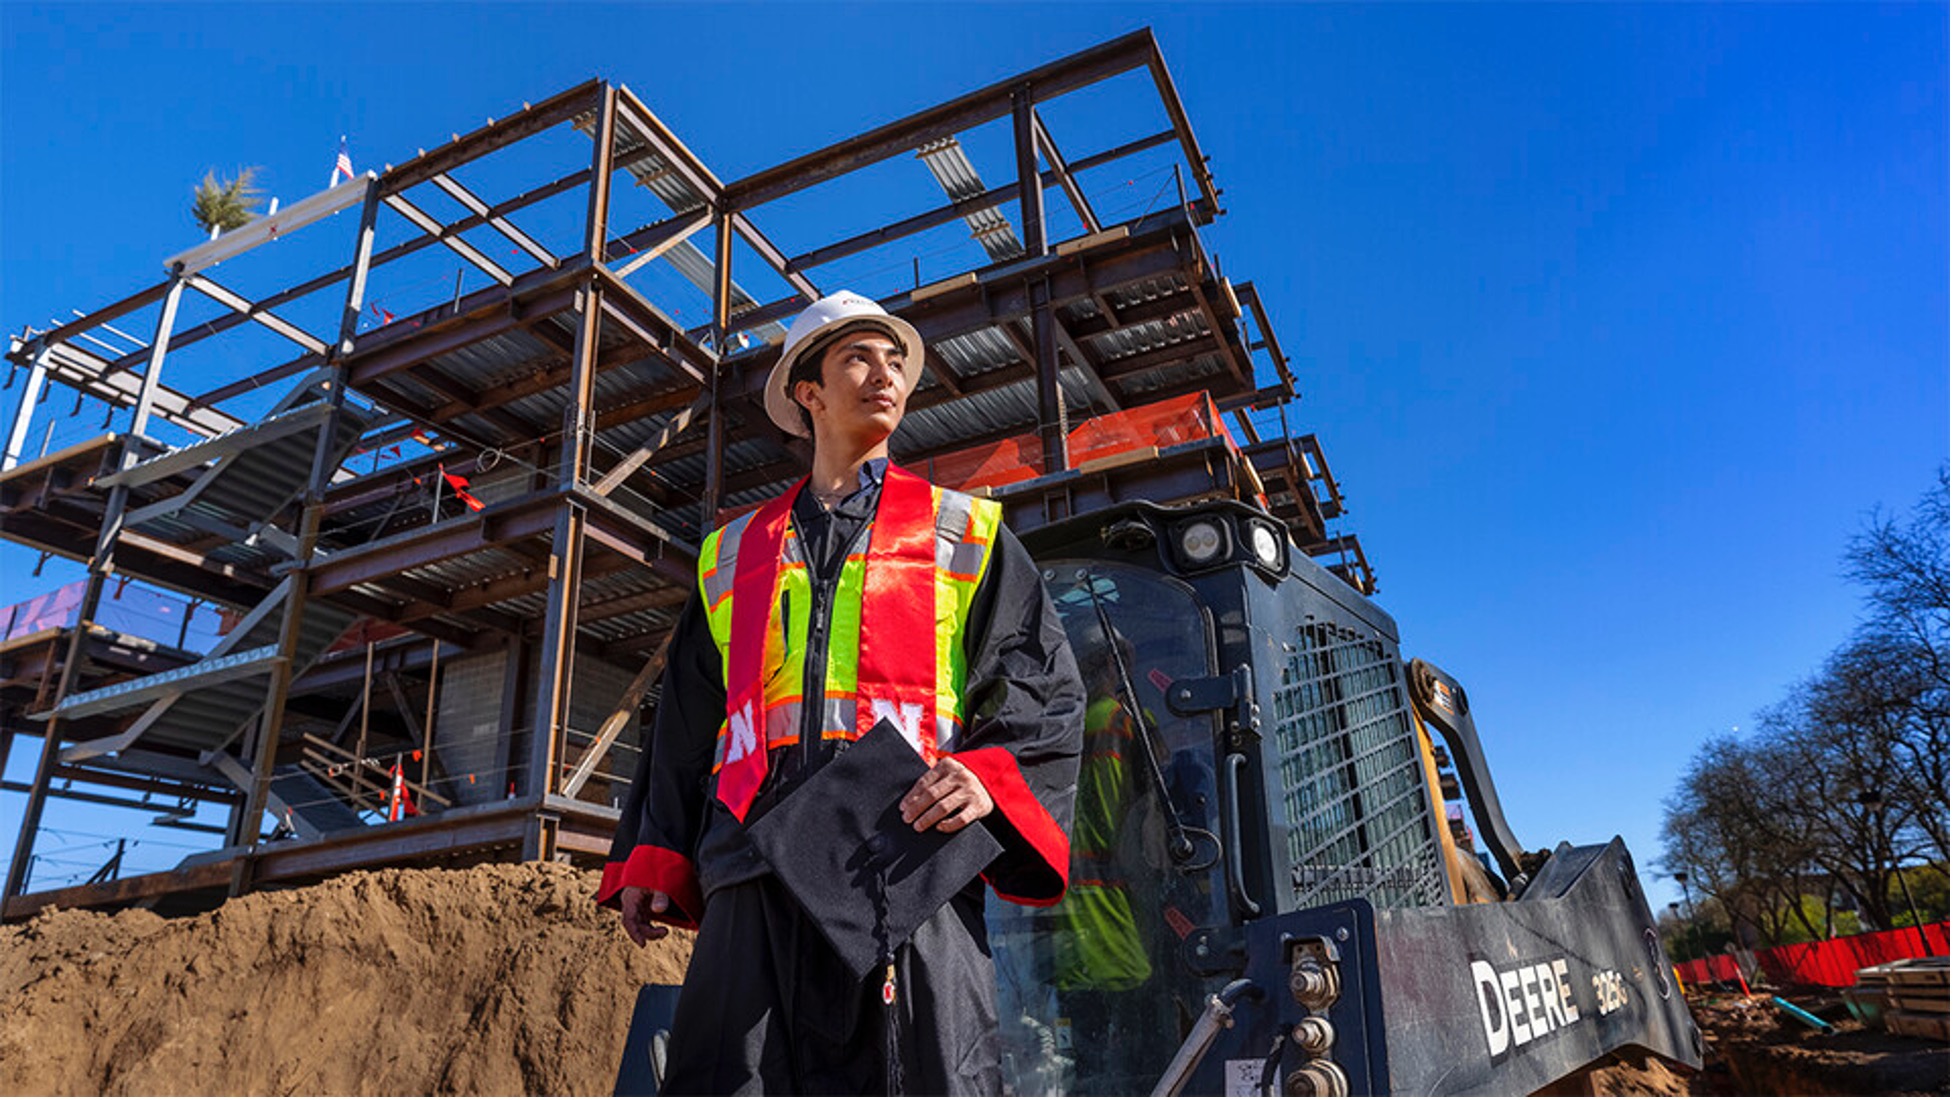 Yajyoo Shrestha, a graduating senior in civil engineering, stands before the construction site of the new College of Education and Human Sciences building on City Campus.